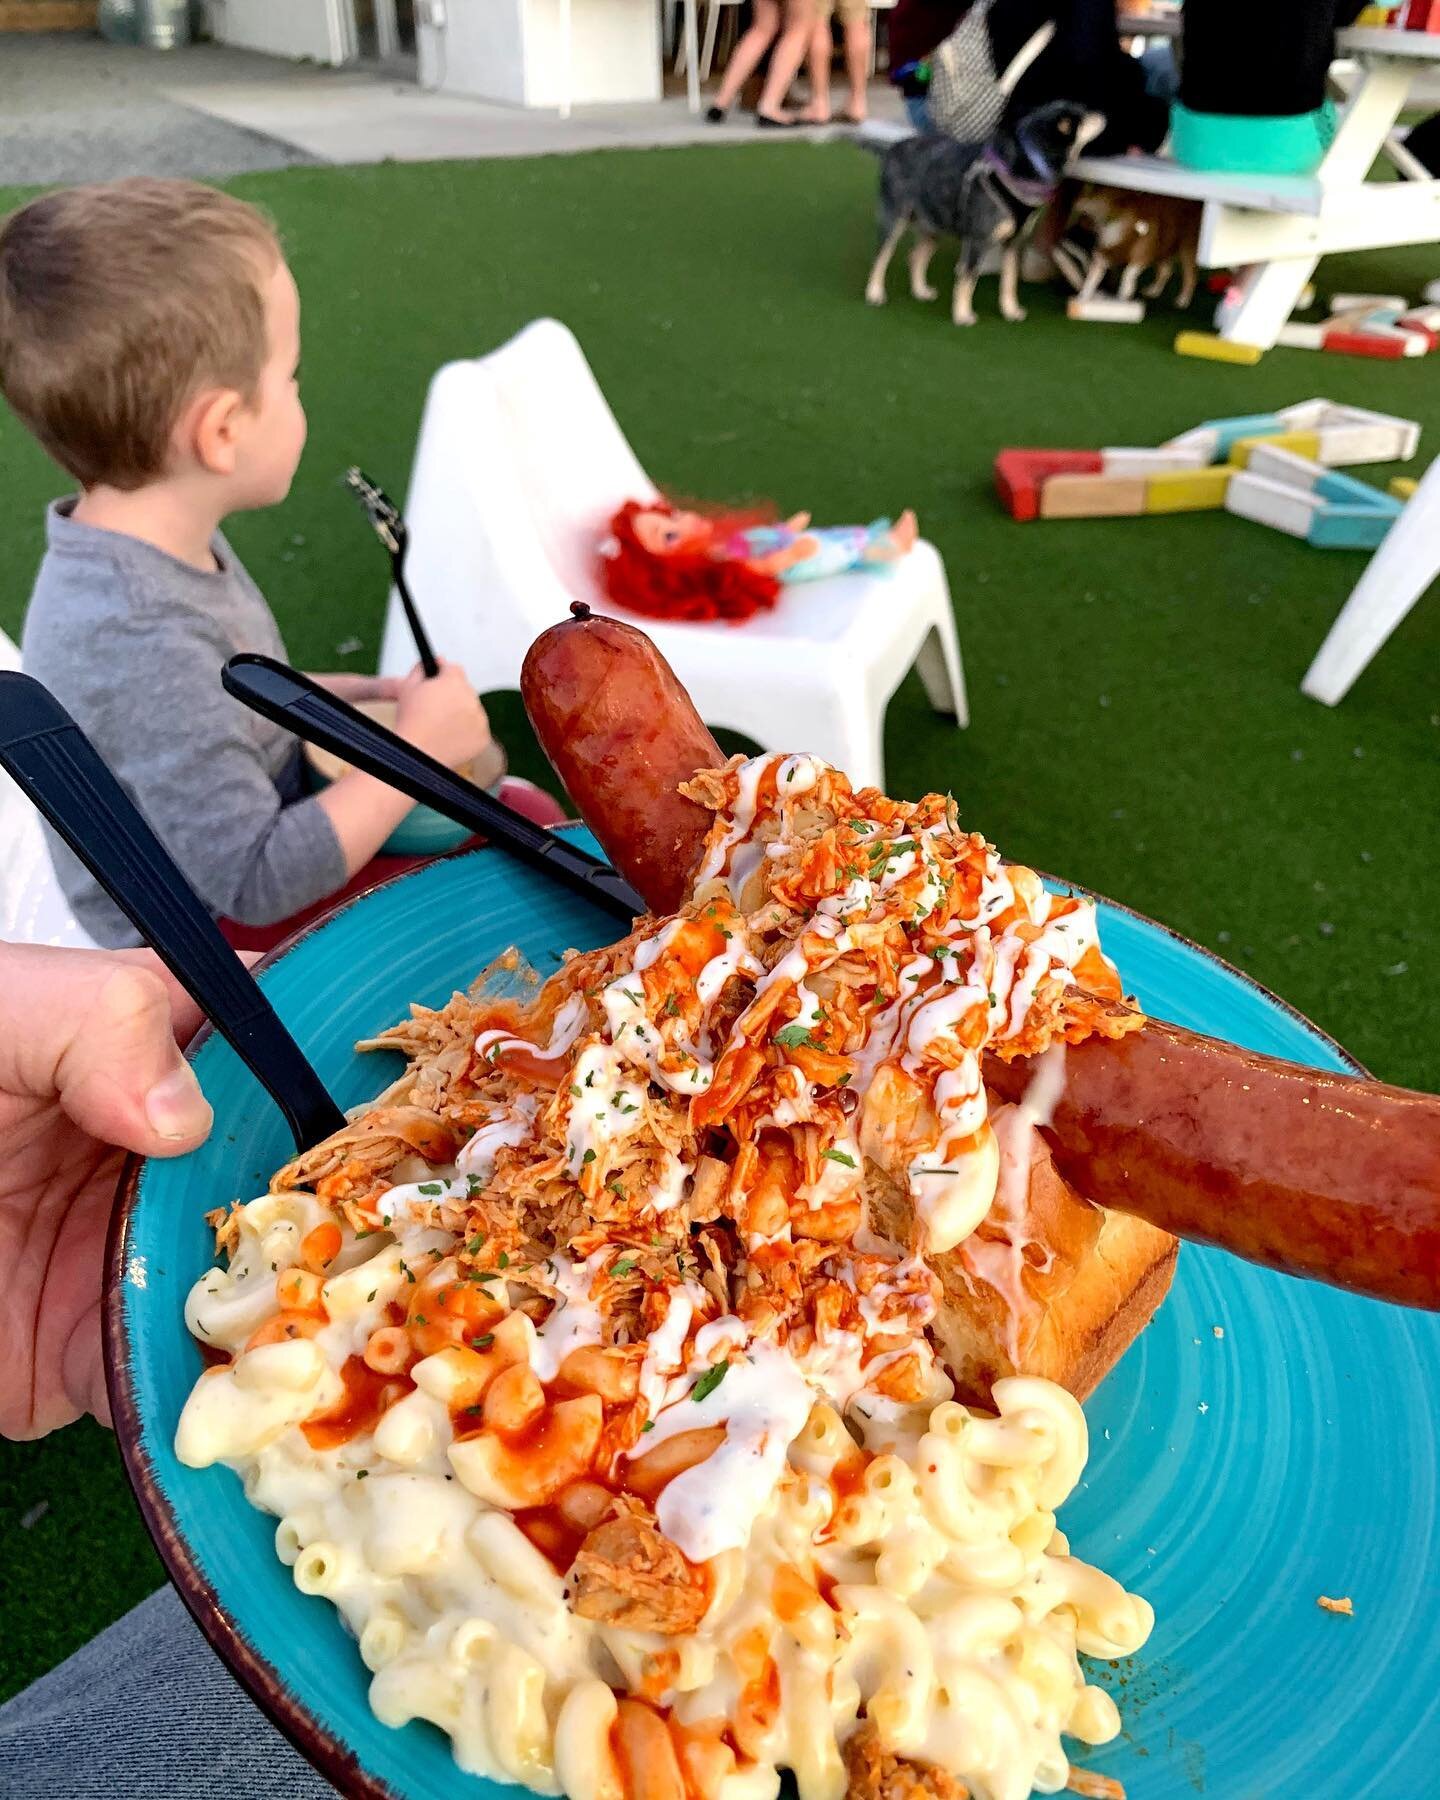 Sausage Squad! Don&rsquo;t sleep on our peeps at @tallymacshack with this beautiful 😍 work of #SausageArt called &lsquo;Gouda Boy&rsquo;.

This bad boy is topped with a smoked gouda and Vermont cheddar mac + 12 hour smoked pulled pork topped with a 